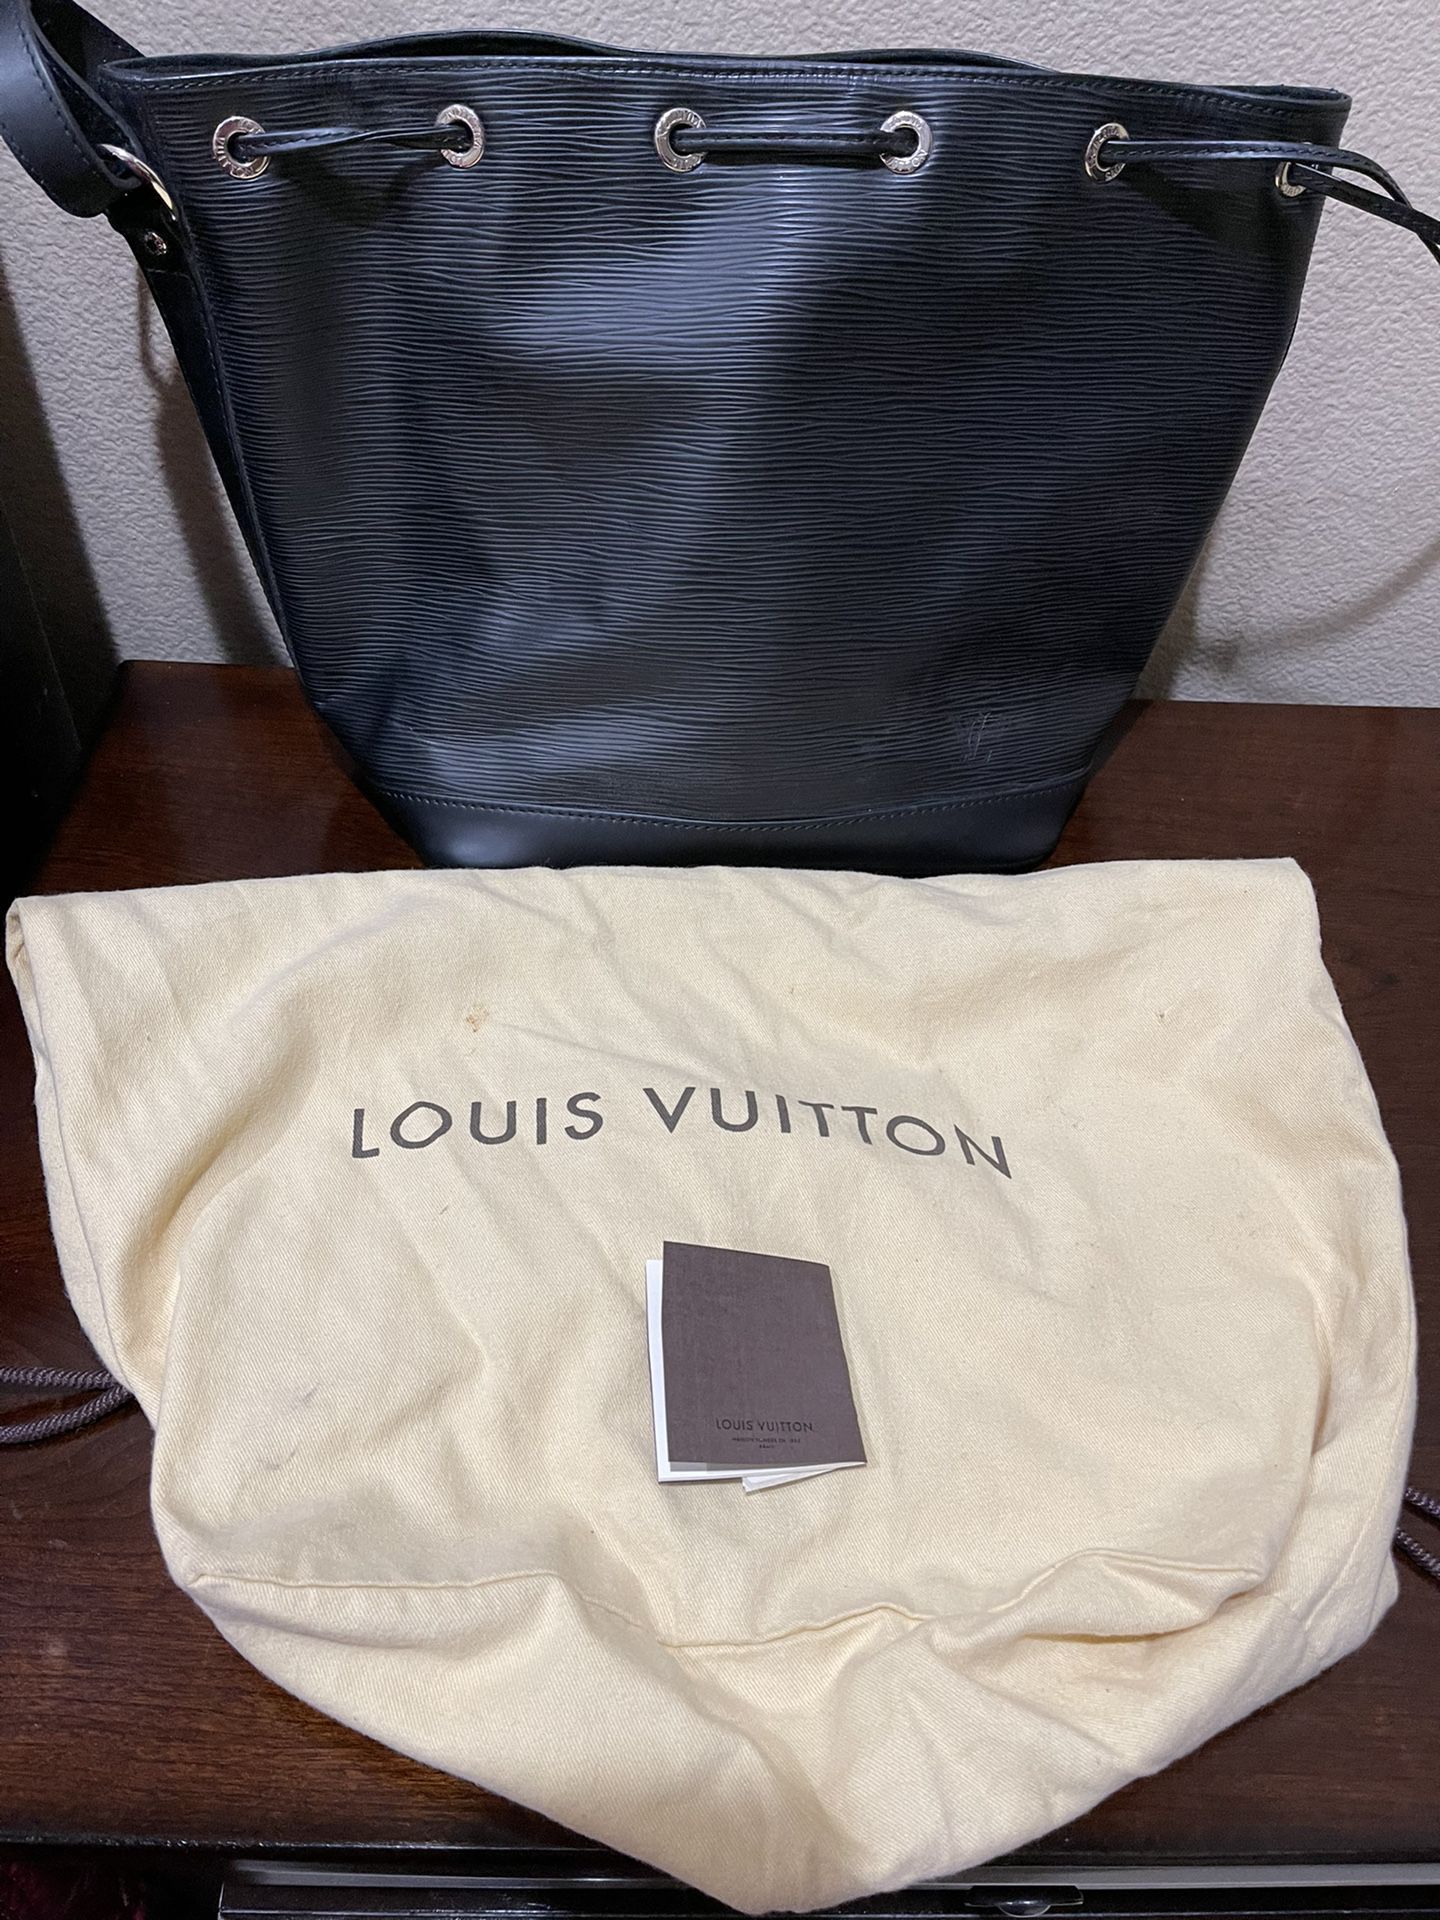 Louis Vuitton Noe Bag In Black - Authentic With Dustbag Included